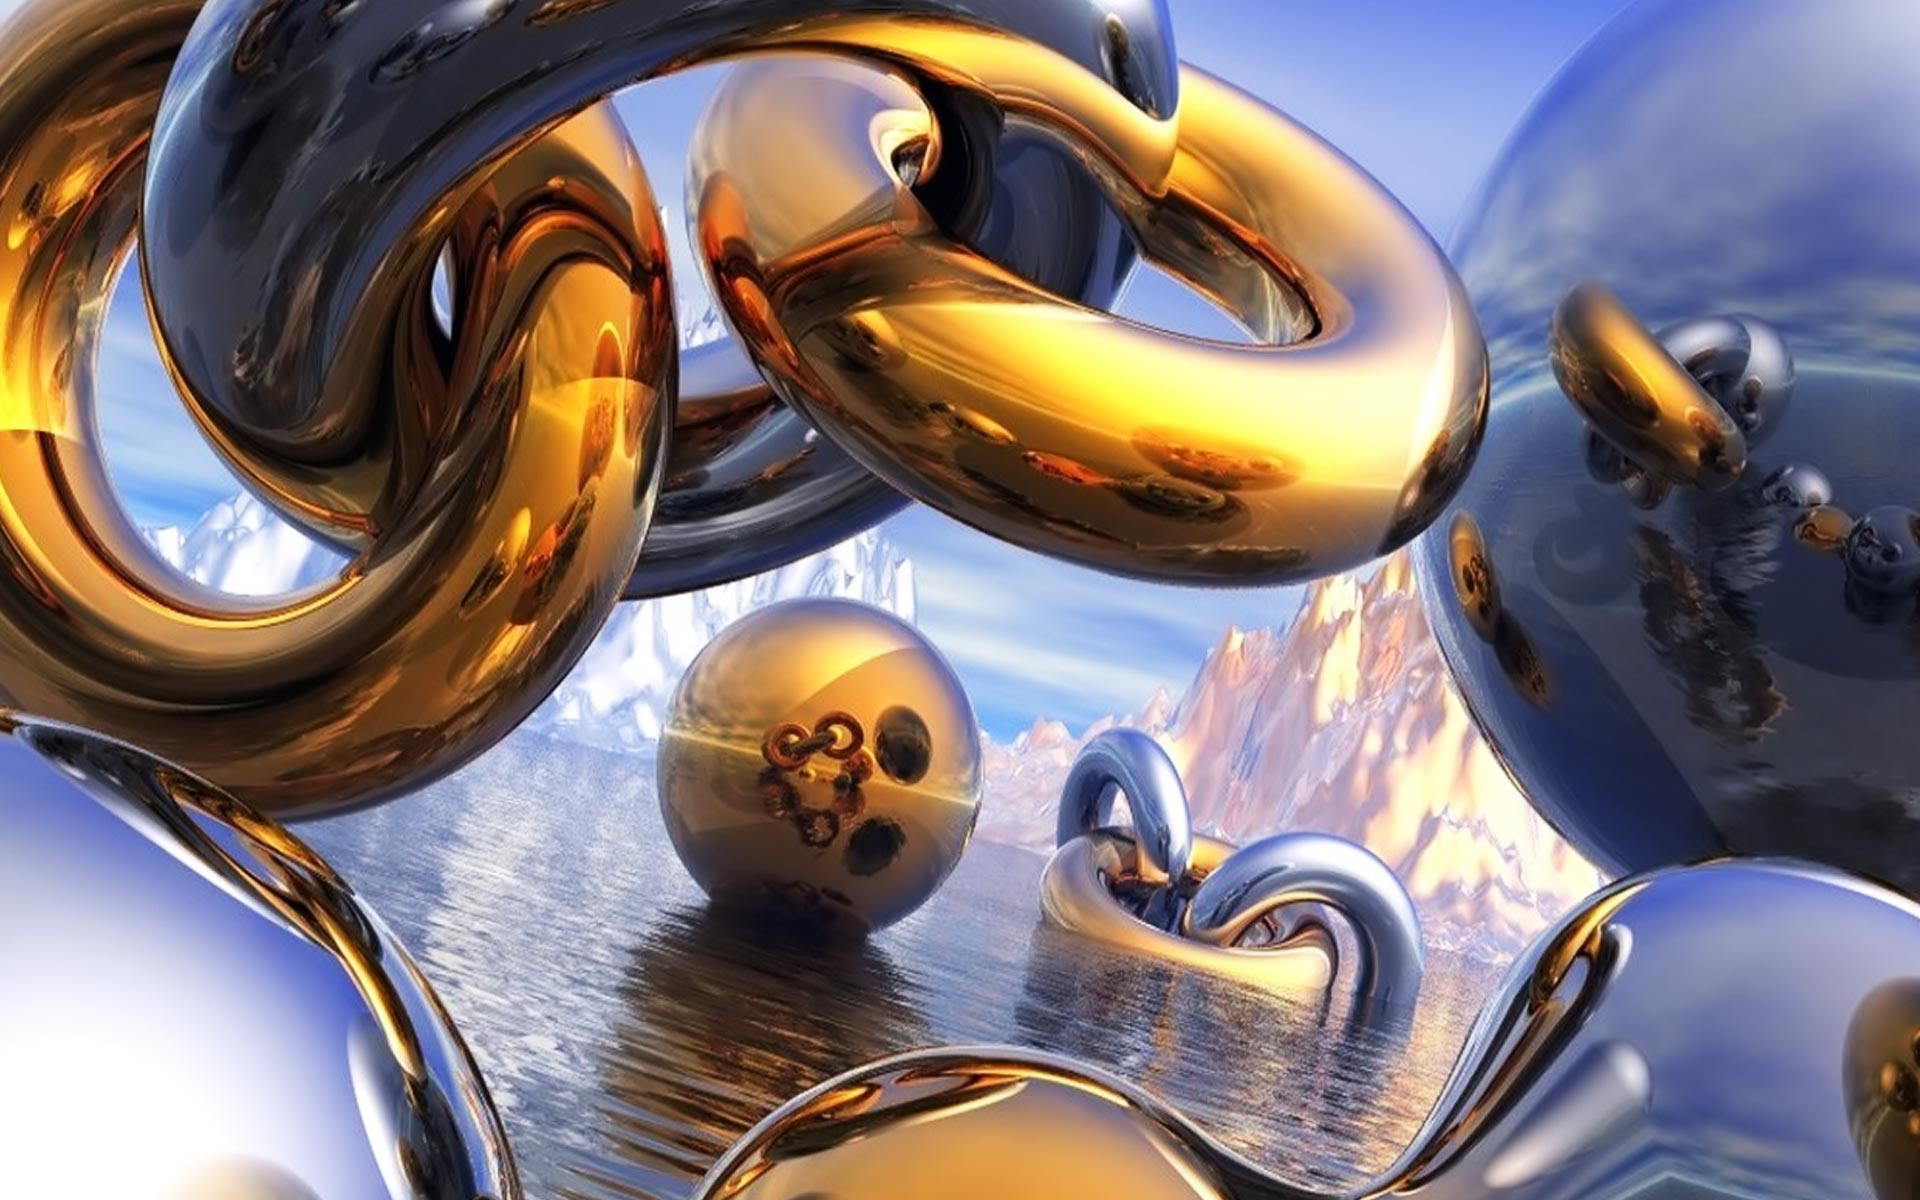 3d, metal, water, abstract, sphere, gold, cgi